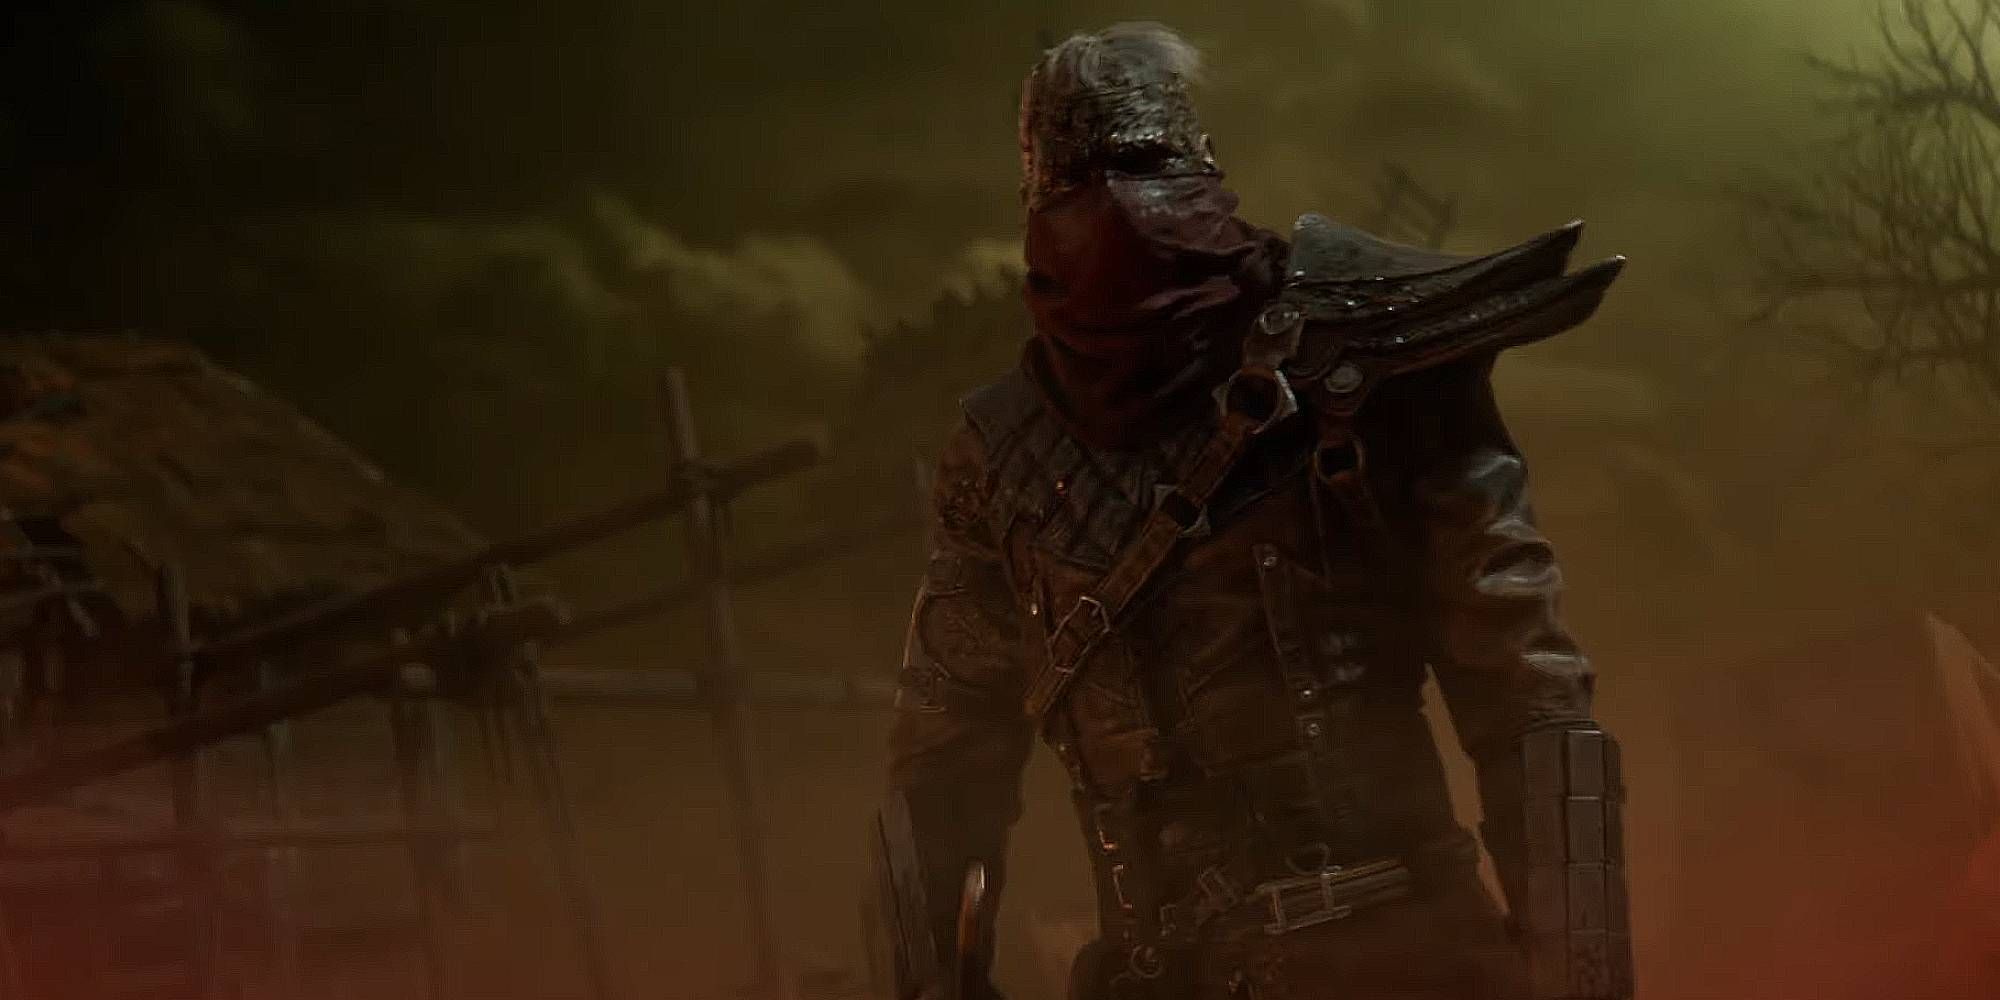 Guard from Dead by Daylight promo teaser of large knight like killer